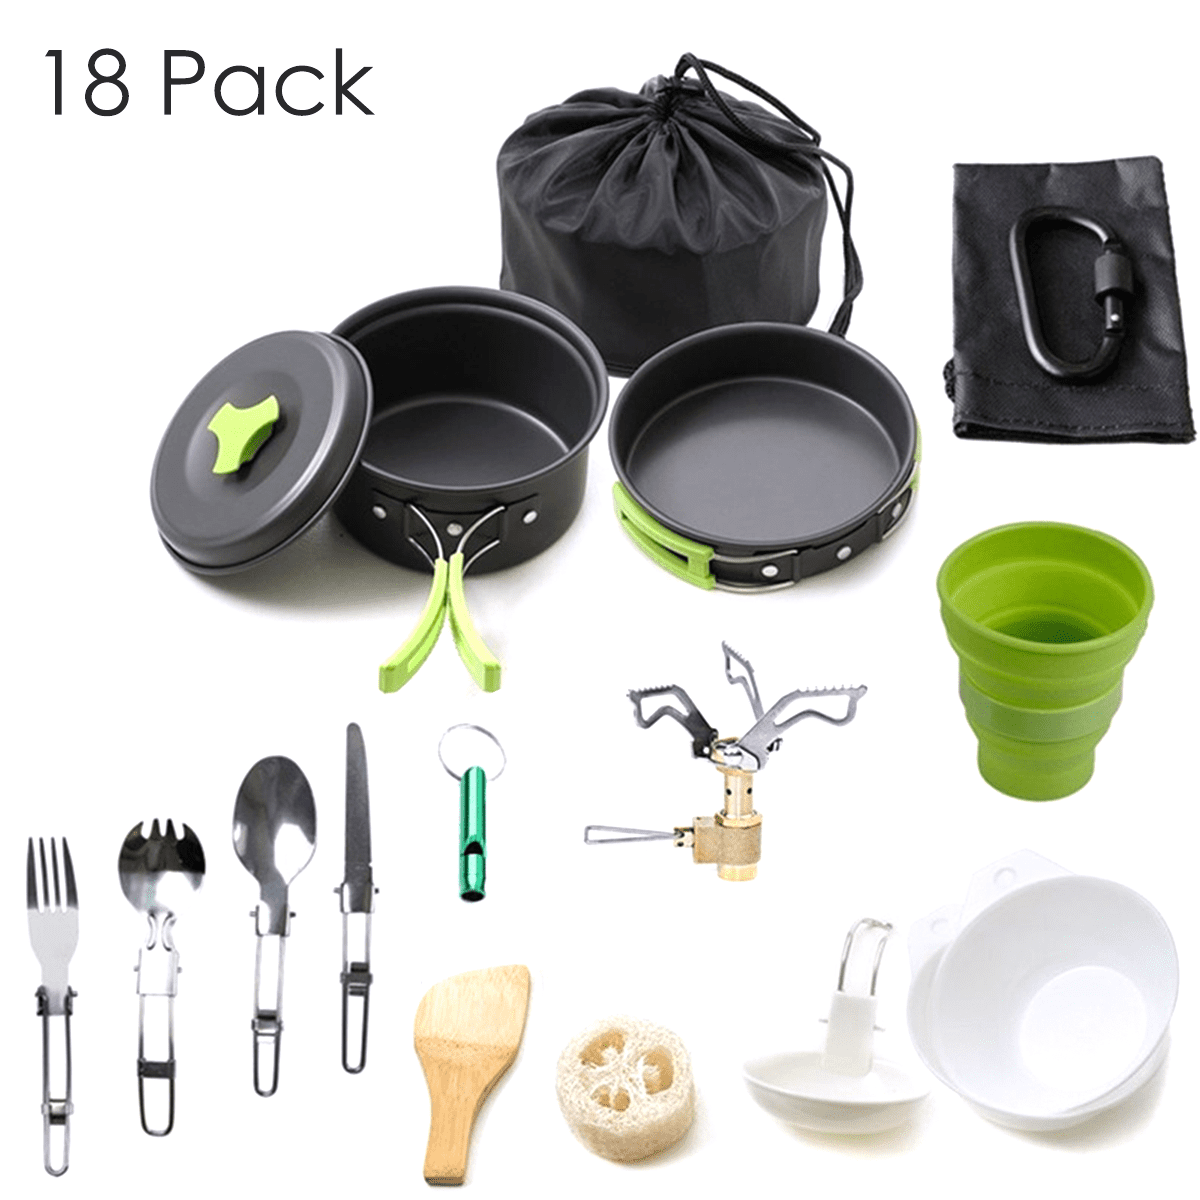 Saiko 13 pcs Camping Cookware Kit,Outdoor Cooking Set Non Stick Camping Pans and Pots Lightweight Campfire Bowl Pot Pan Gas Stove Backpacking Gear for Hiking BBQ Picnic Hiking Fishing